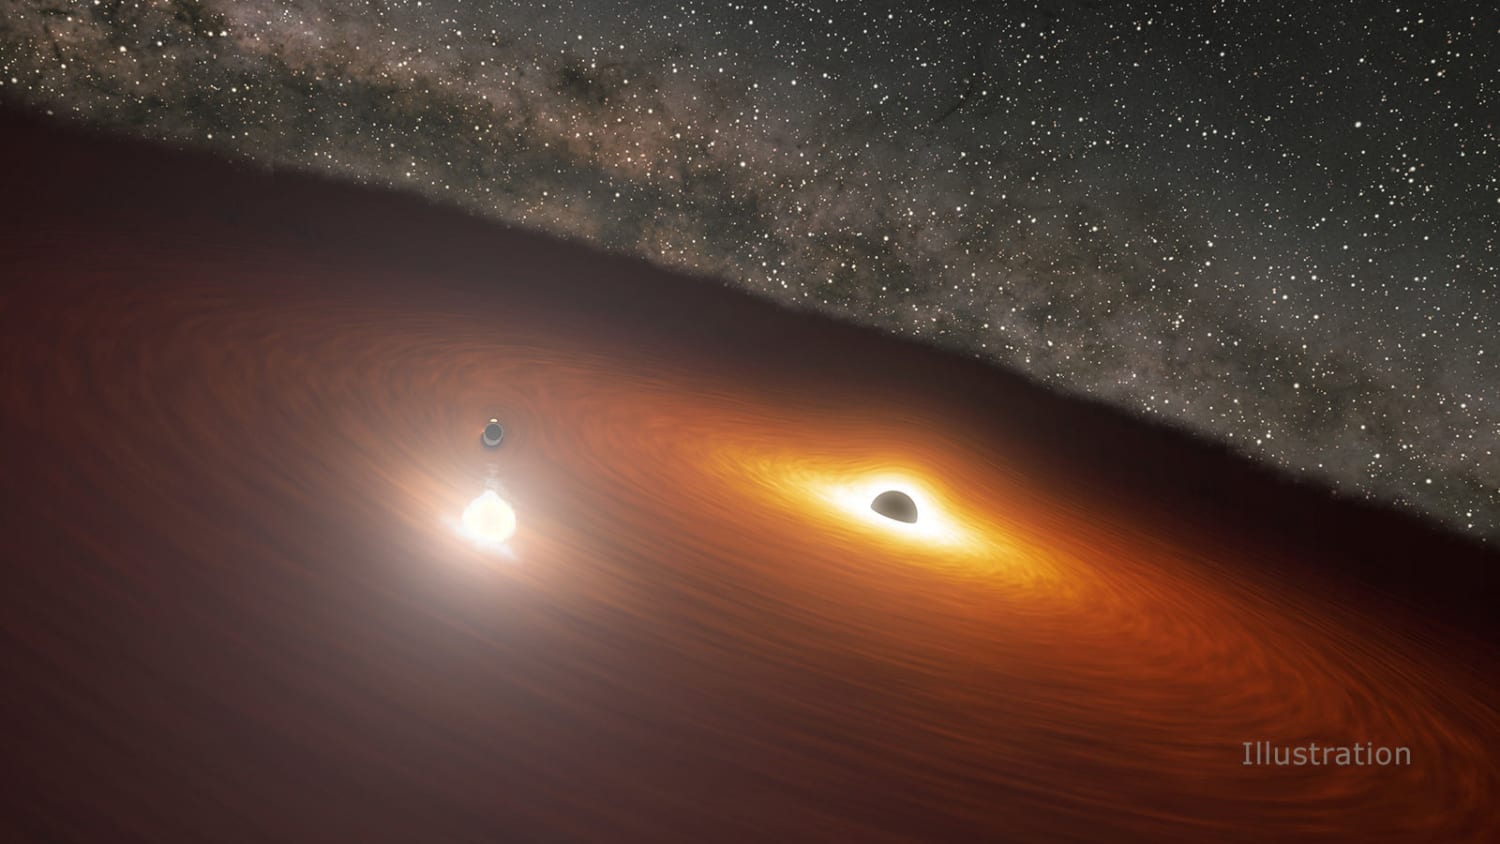 A huge black hole eats a huger black hole's dinner then explodes with the light of a trillion suns